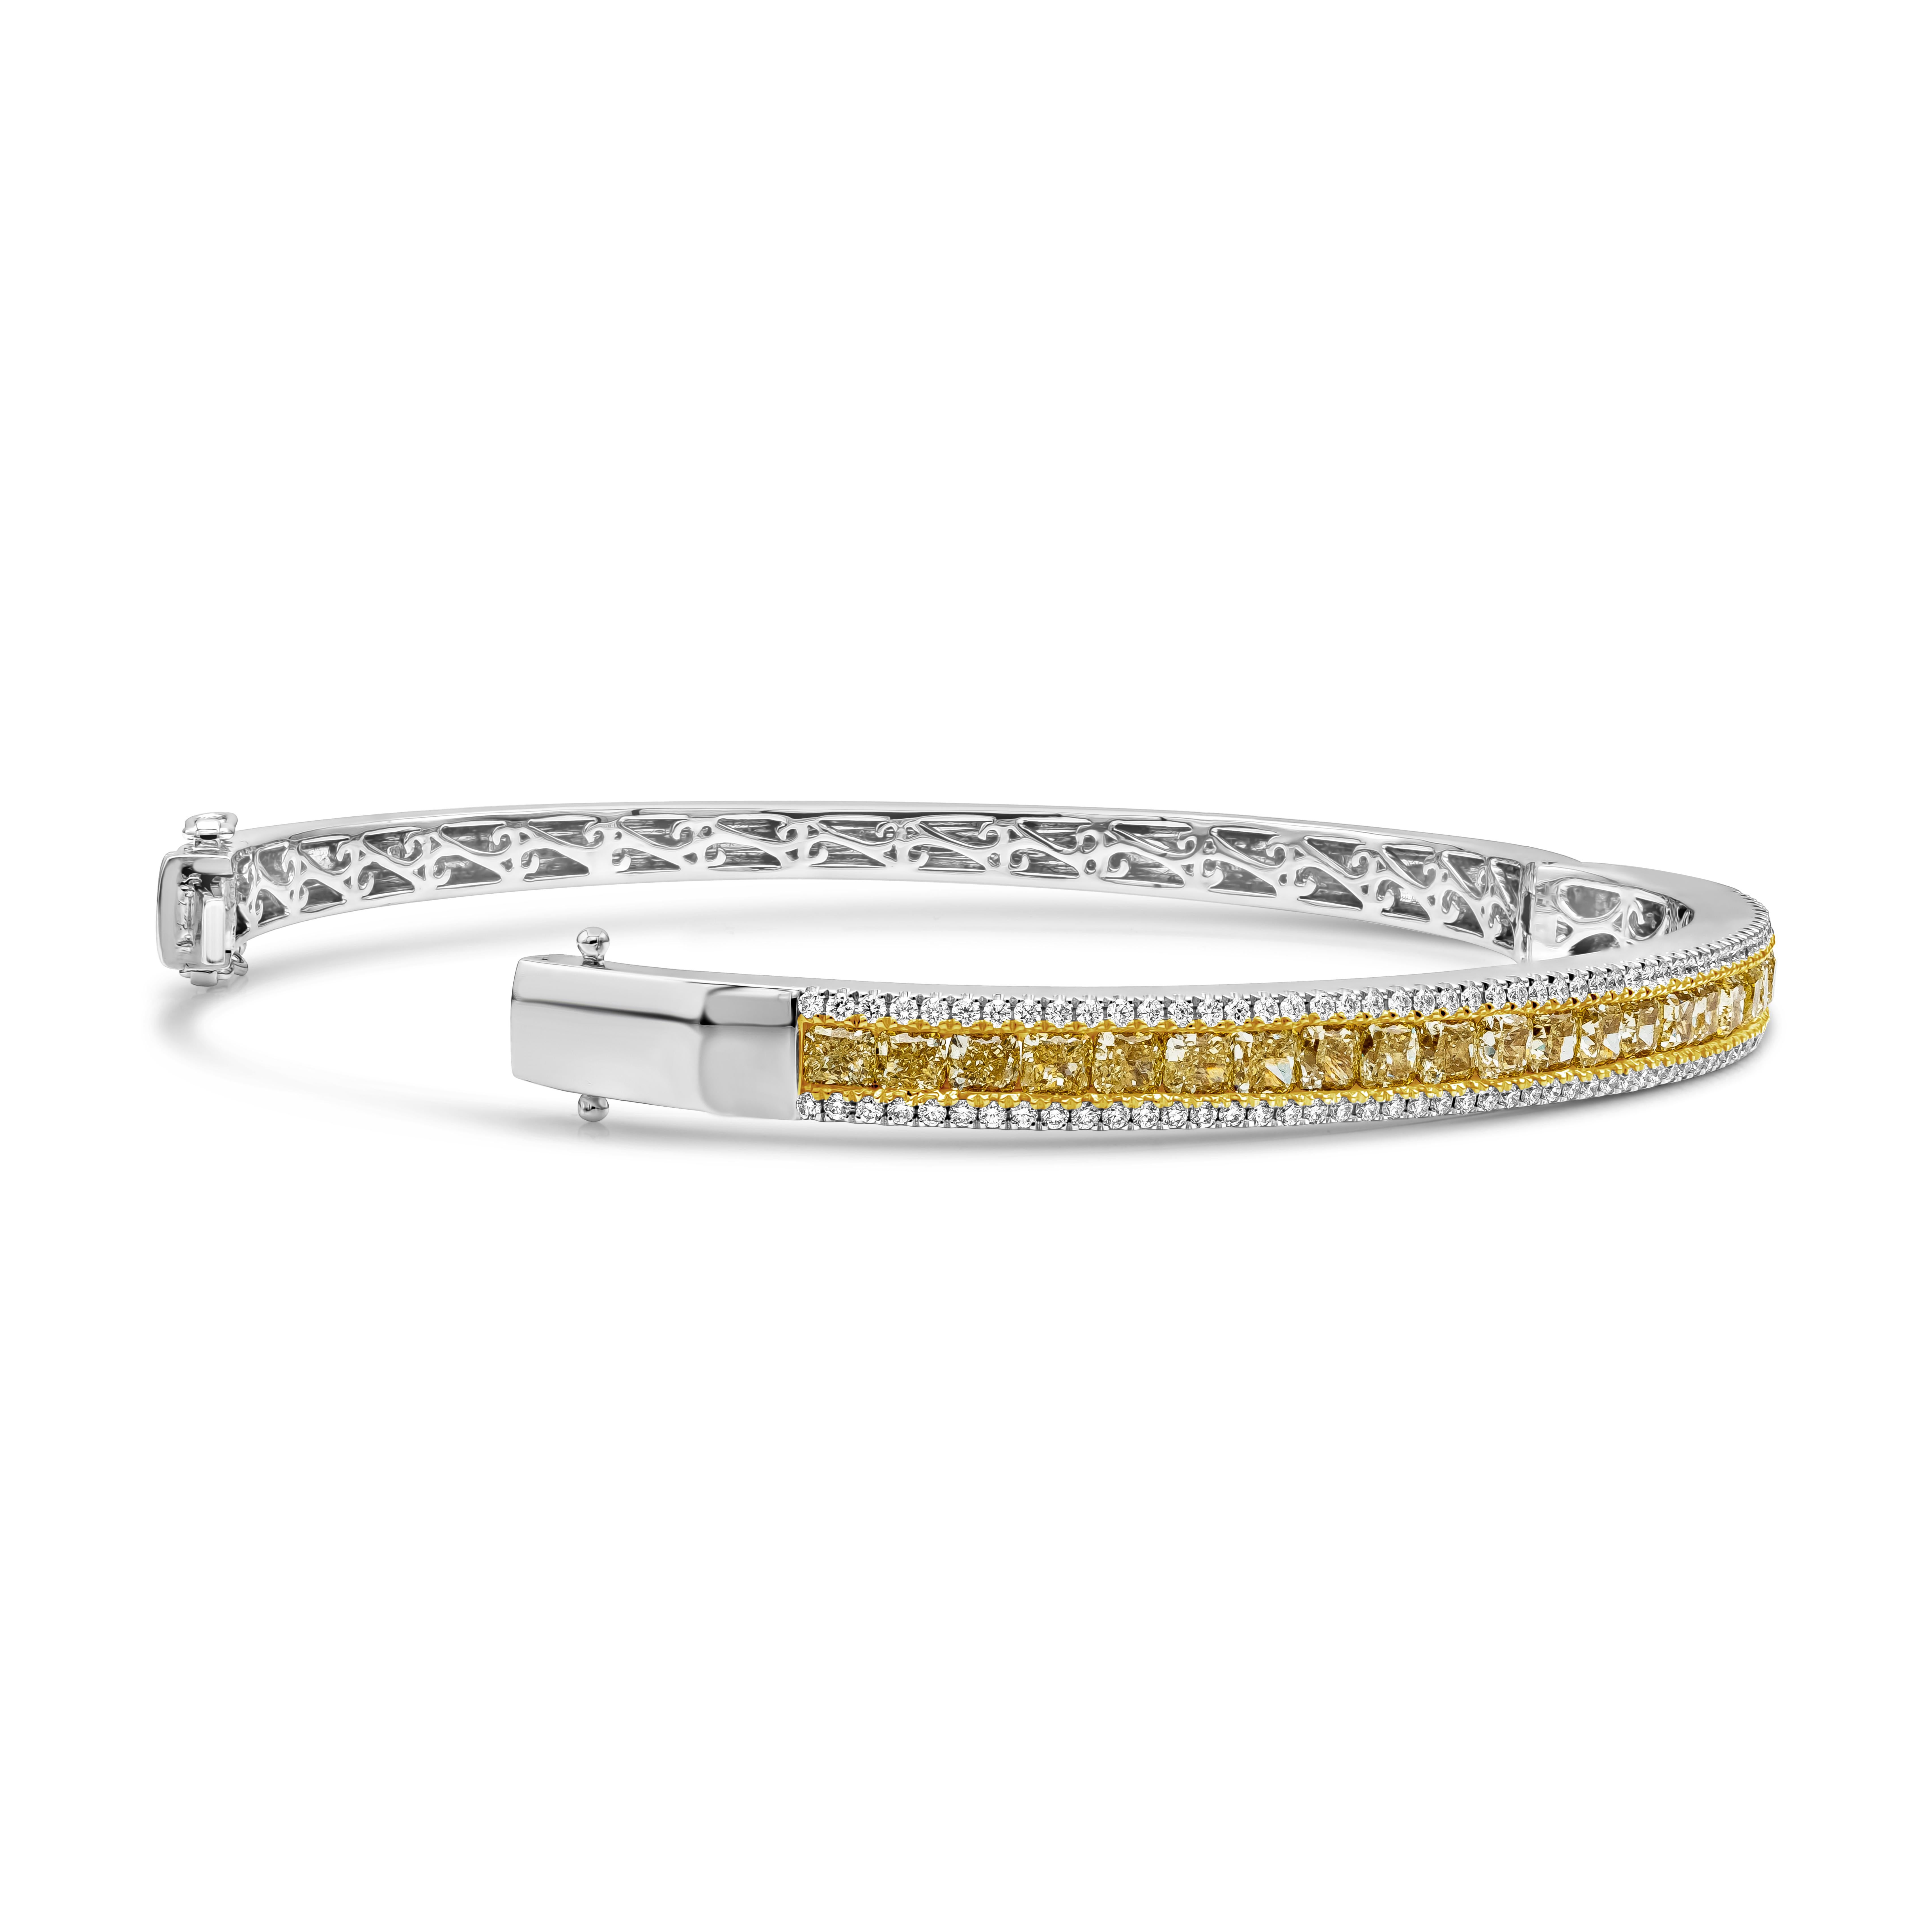 This chic-style bangle features a row of fancy yellow color cushion cut diamonds, weighs 4.14 carats total. Each 23 pieces of cushion cut diamonds is accented by a single row of round brilliant diamonds weighing 0.72 carats total. Fancy yellow color